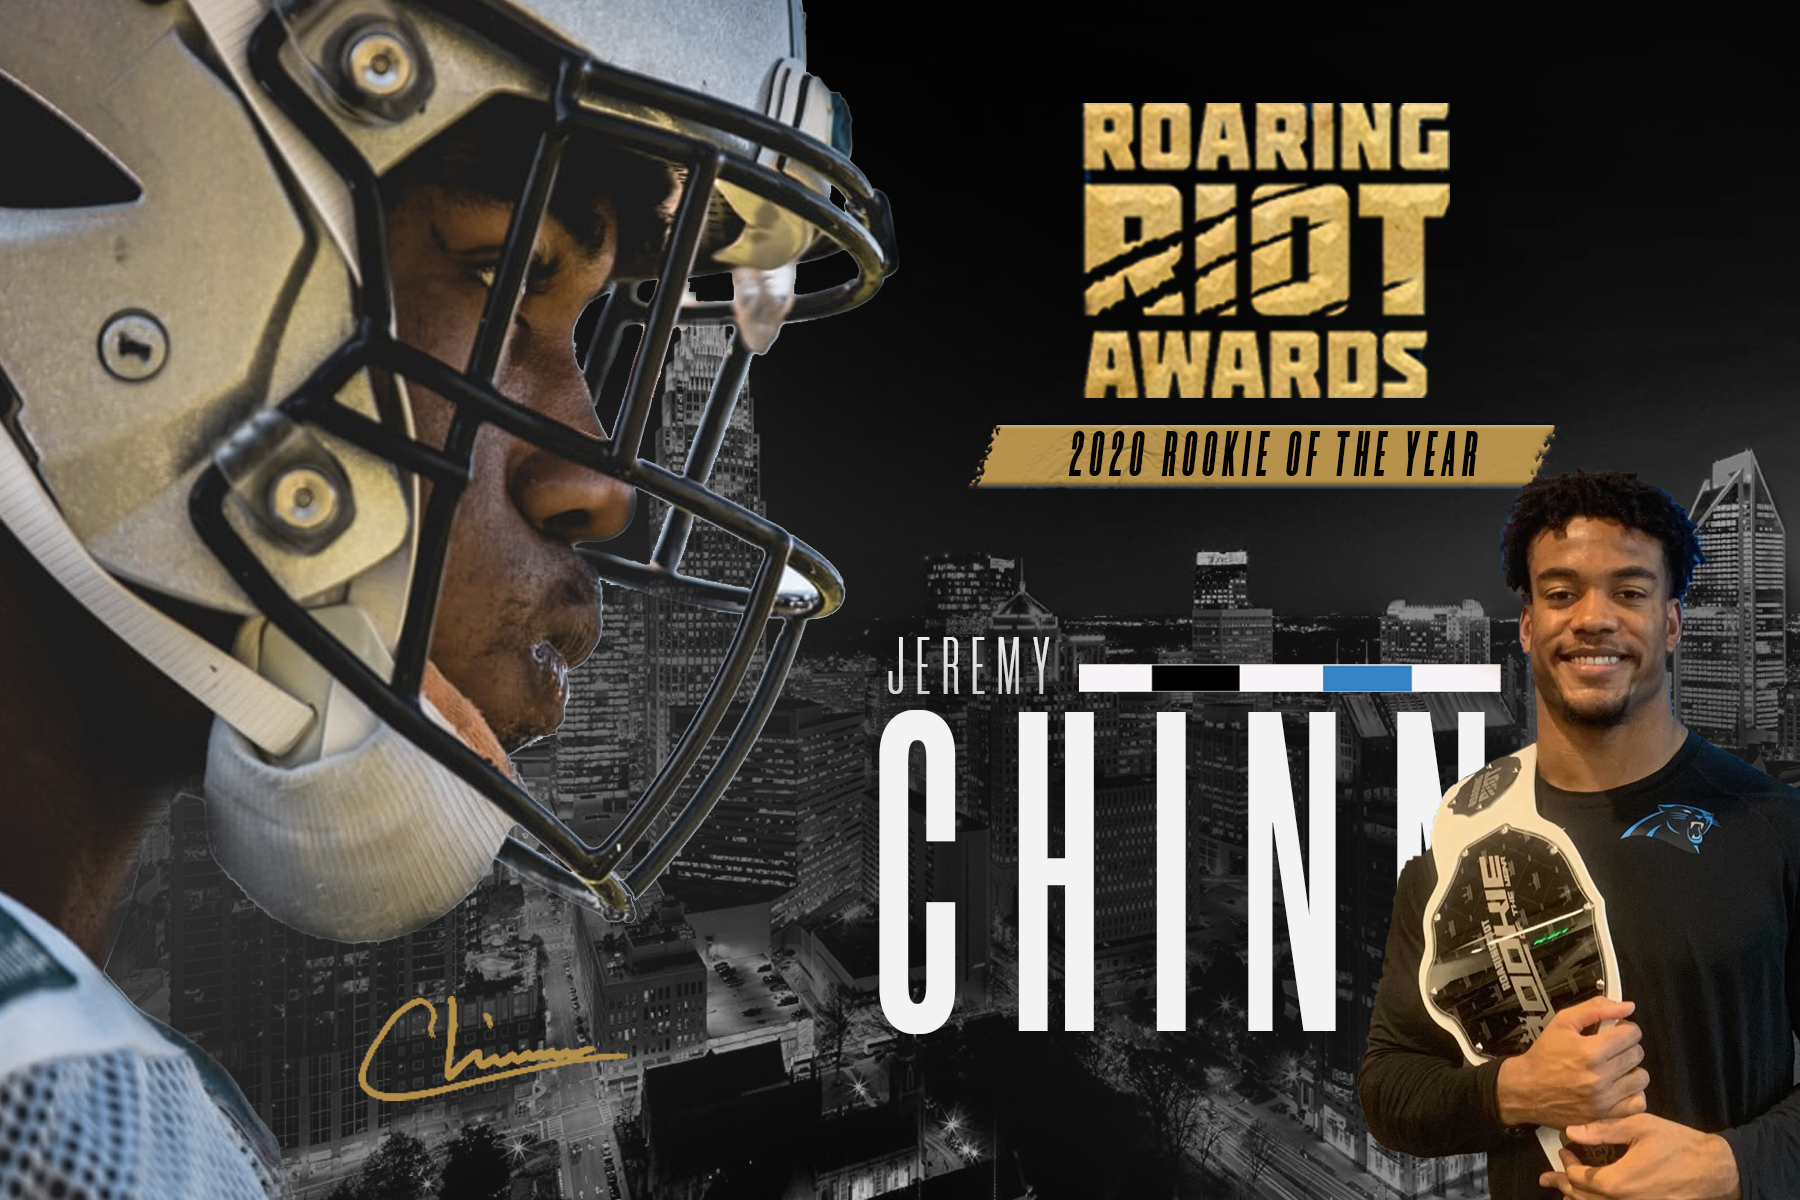 Jeremy Chinn Is Roaring Riot’s 2020 Rookie Of The Year